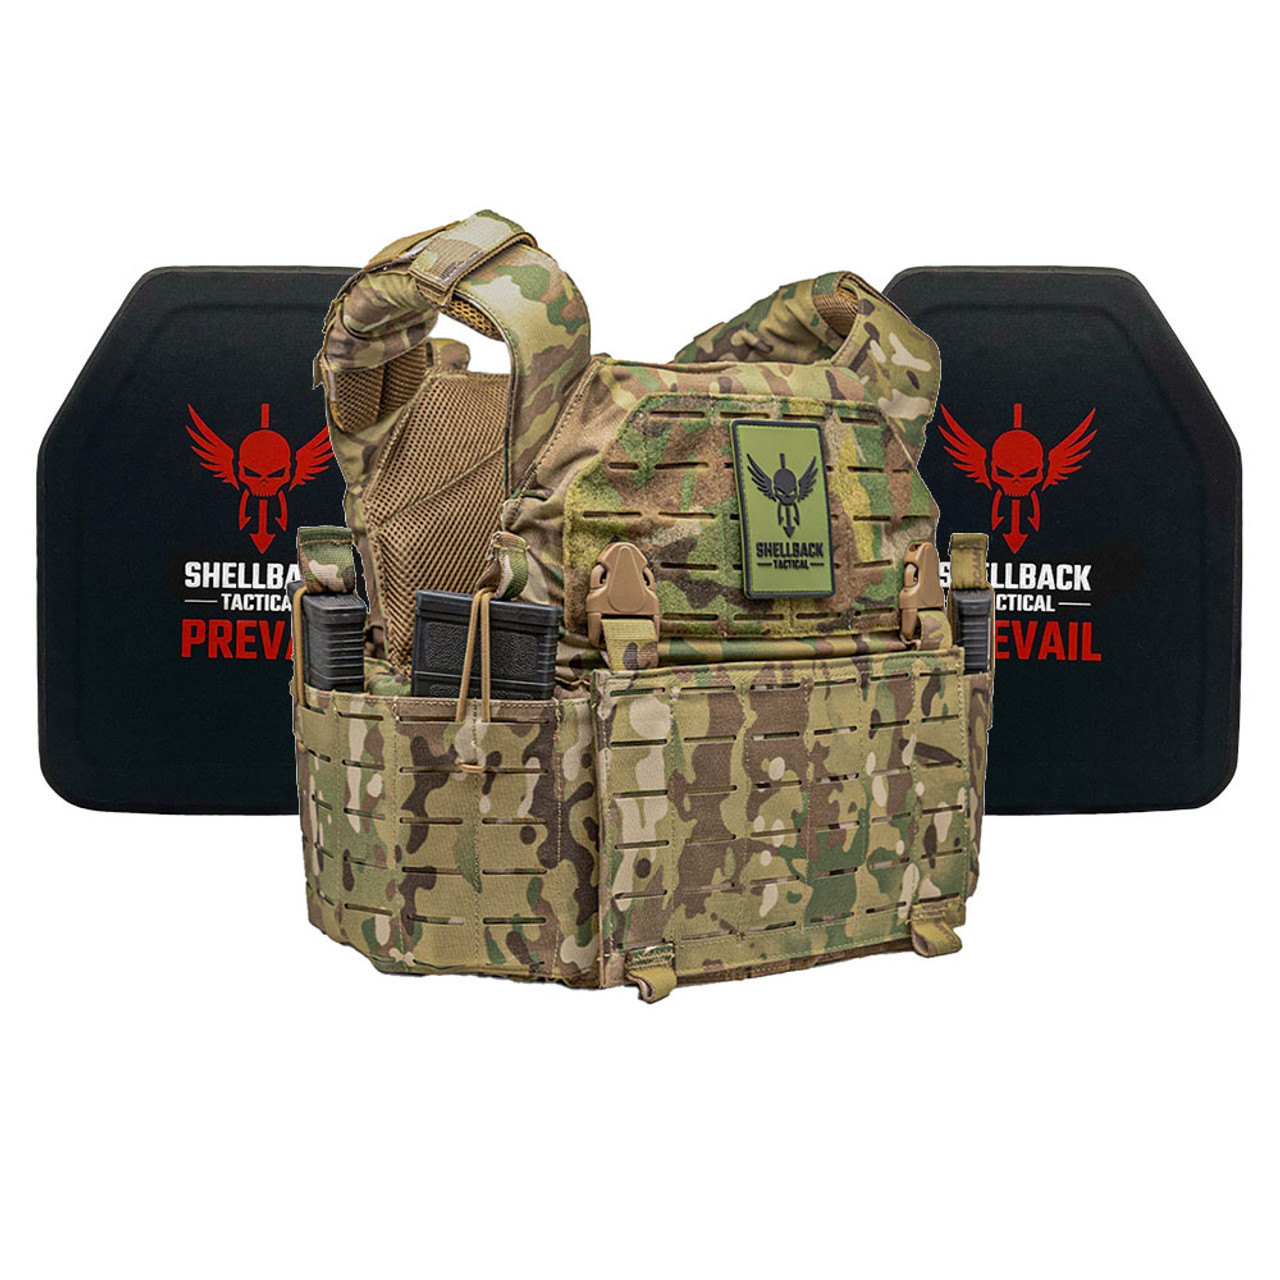 Shellback Tactical Rampage 2.0 Lightweight Level IV Armor Kit with Model  4SICMH Ceramic Plates